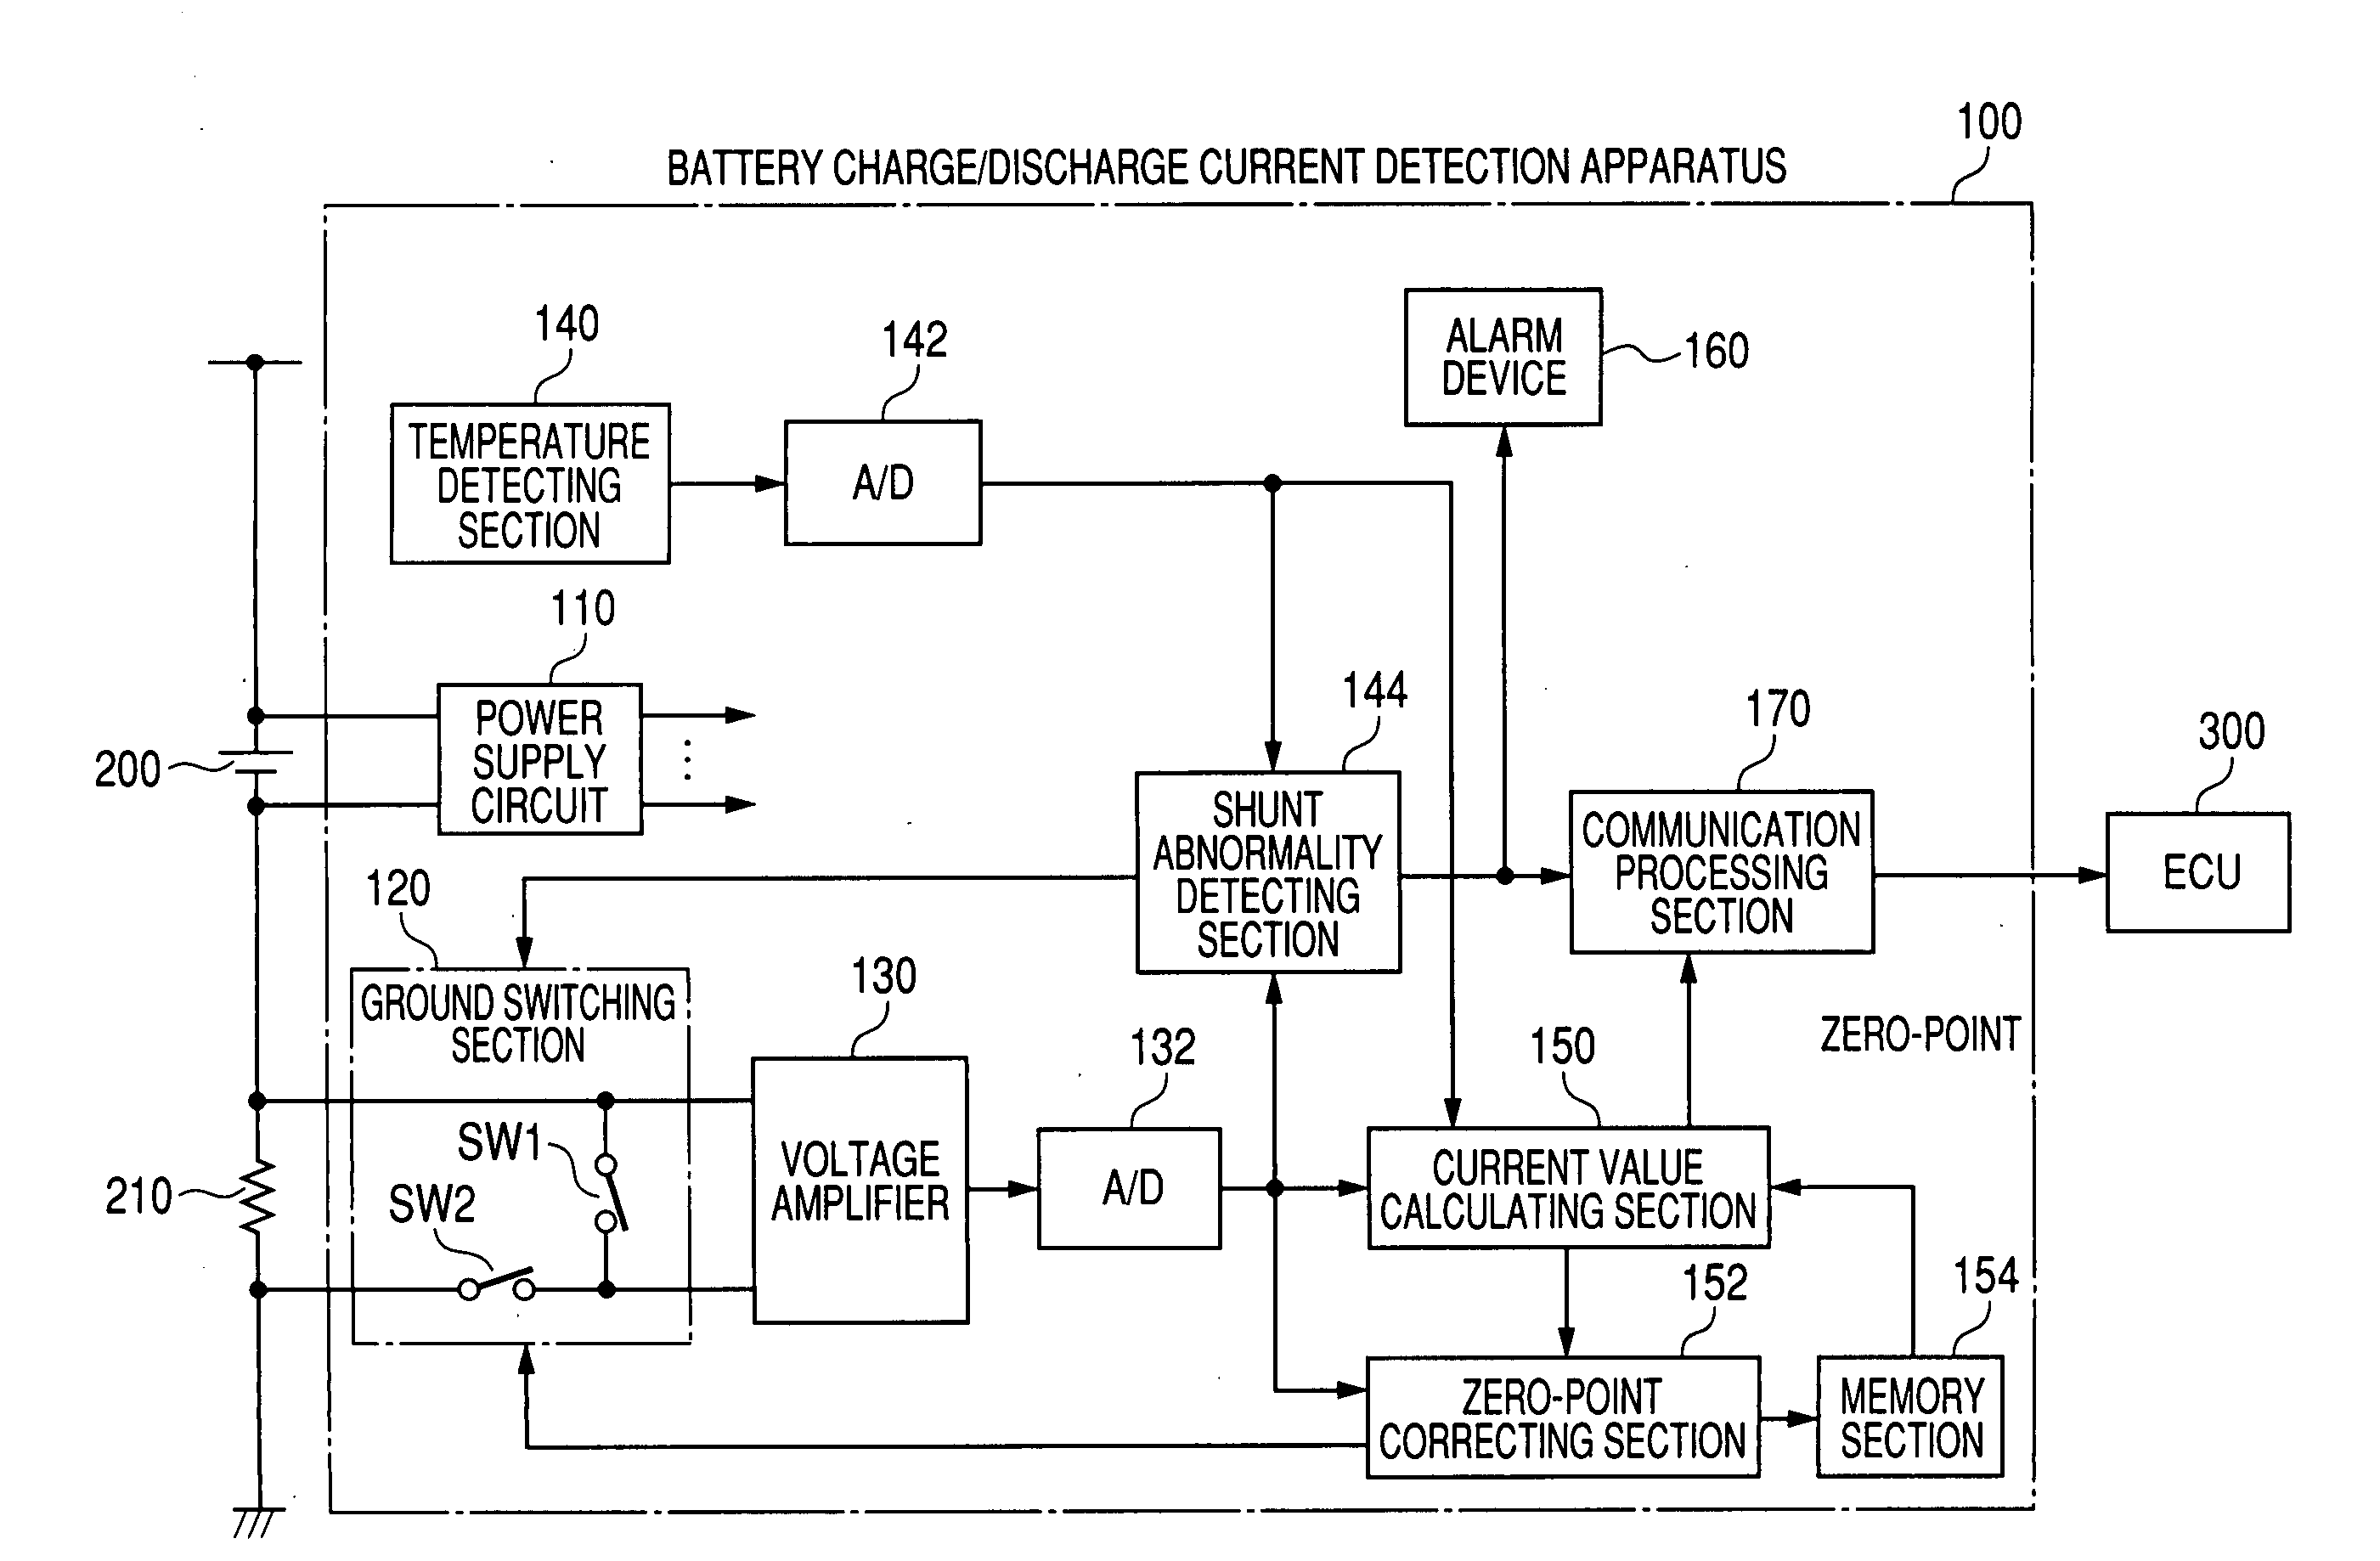 Battery charge/discharge current detection apparatus